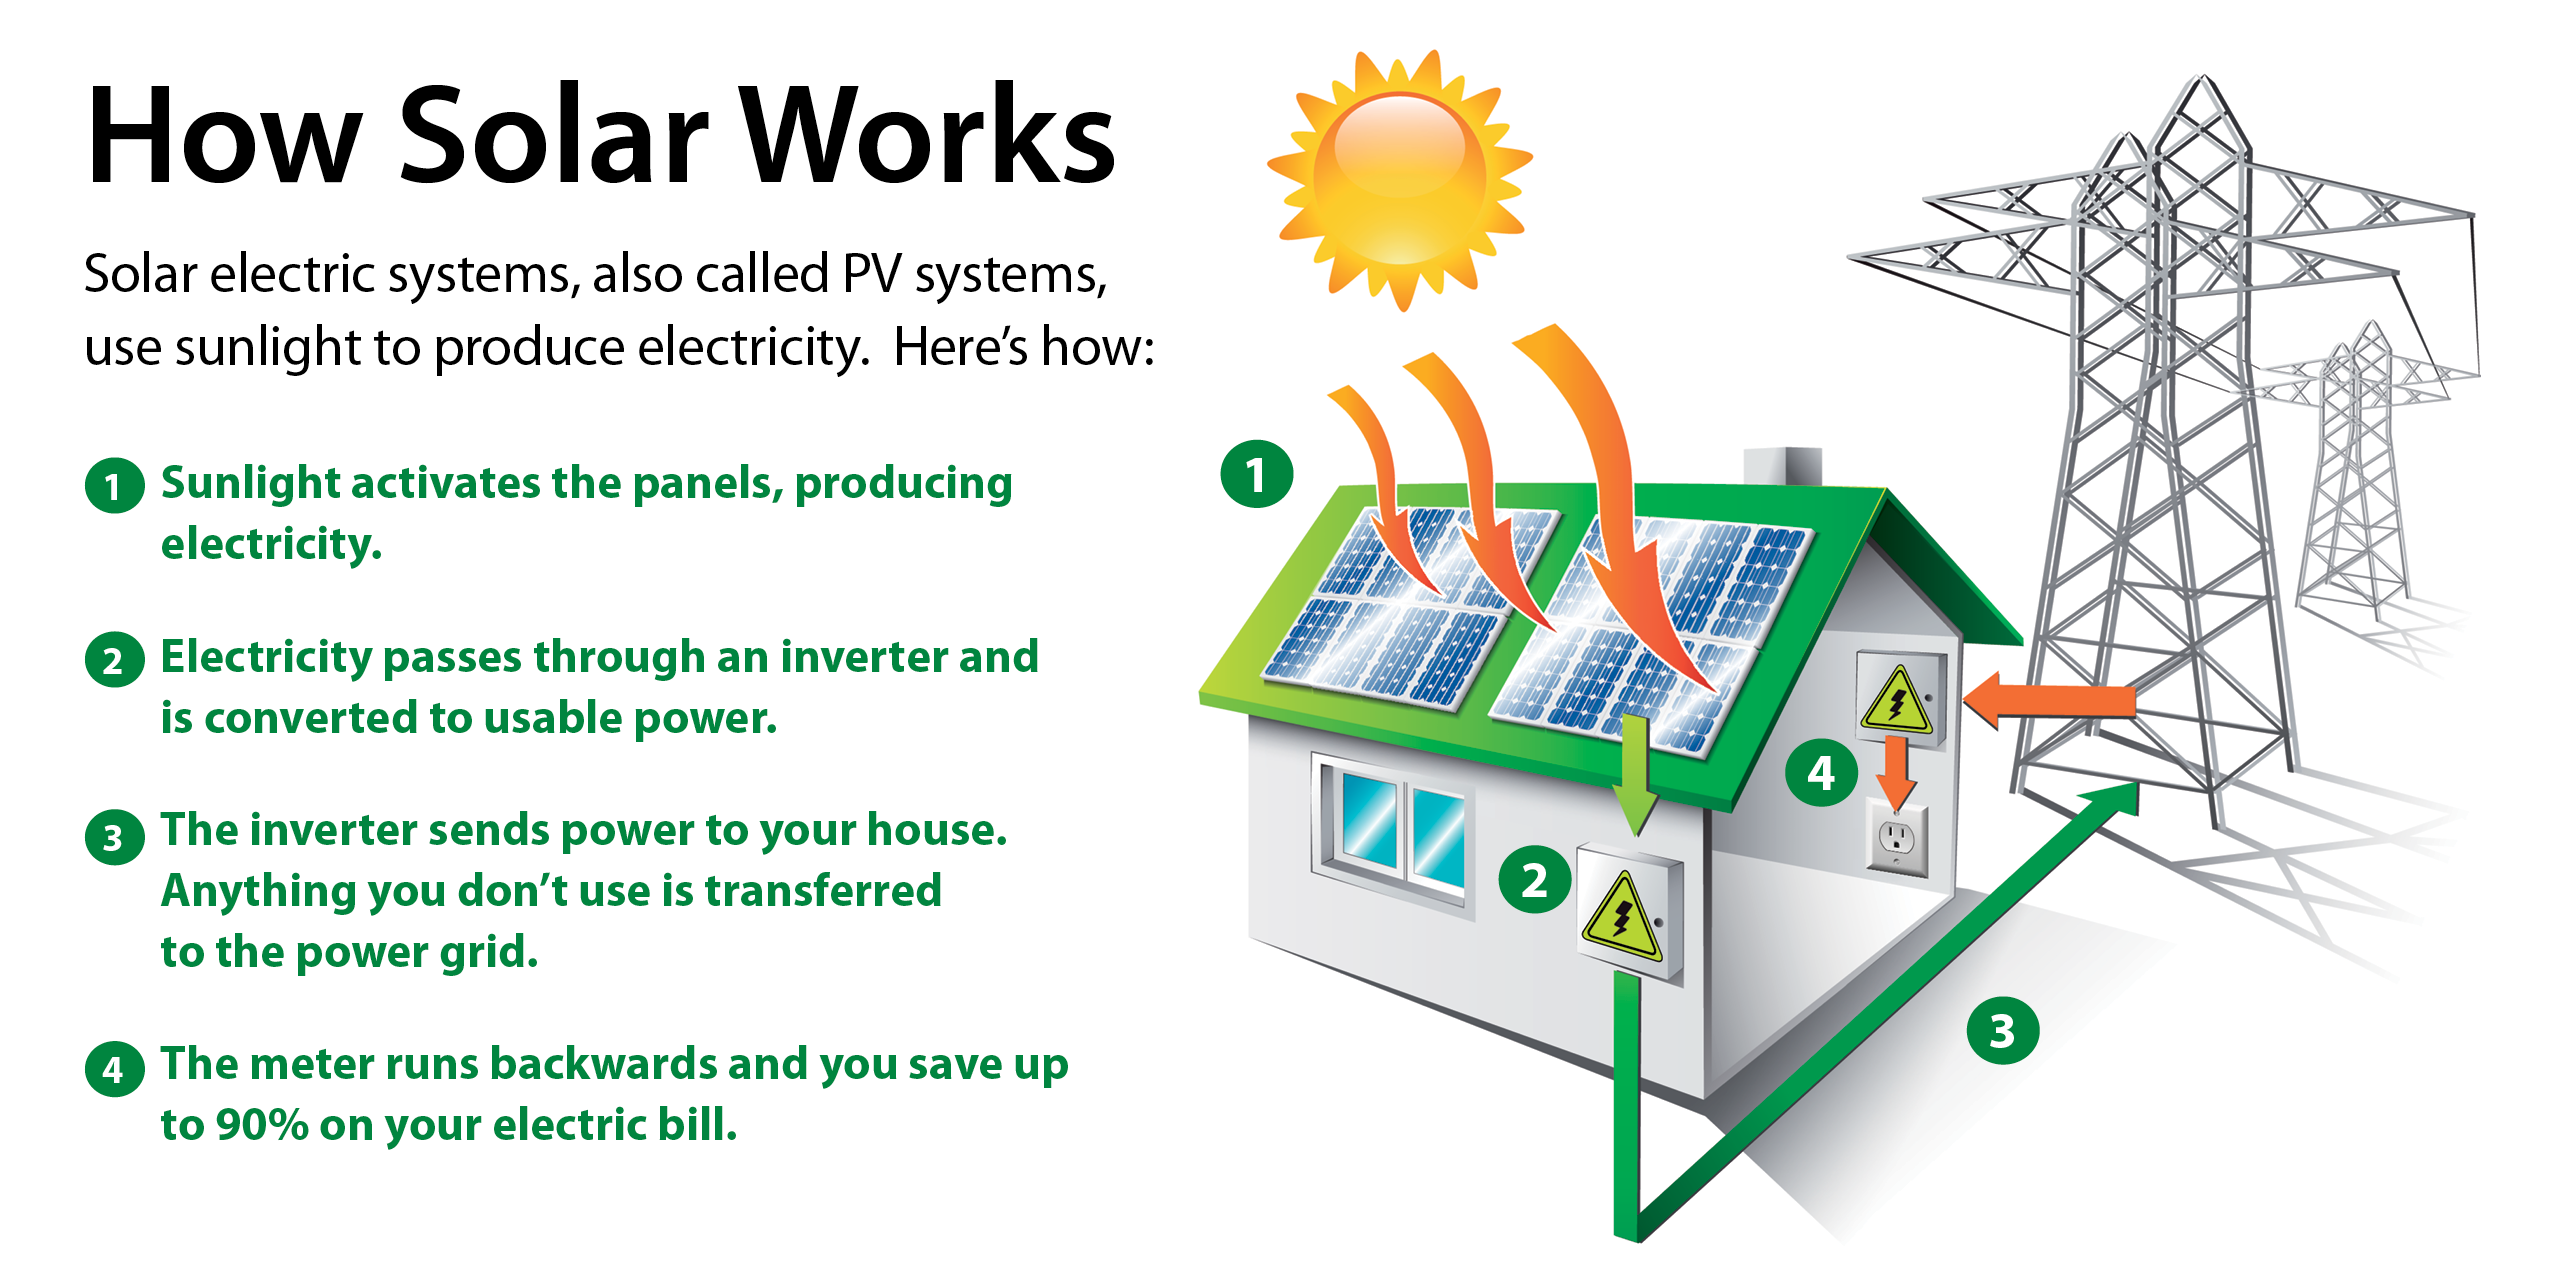 Frequently Asked Questions About Going Solar with GRID GRID Alternatives